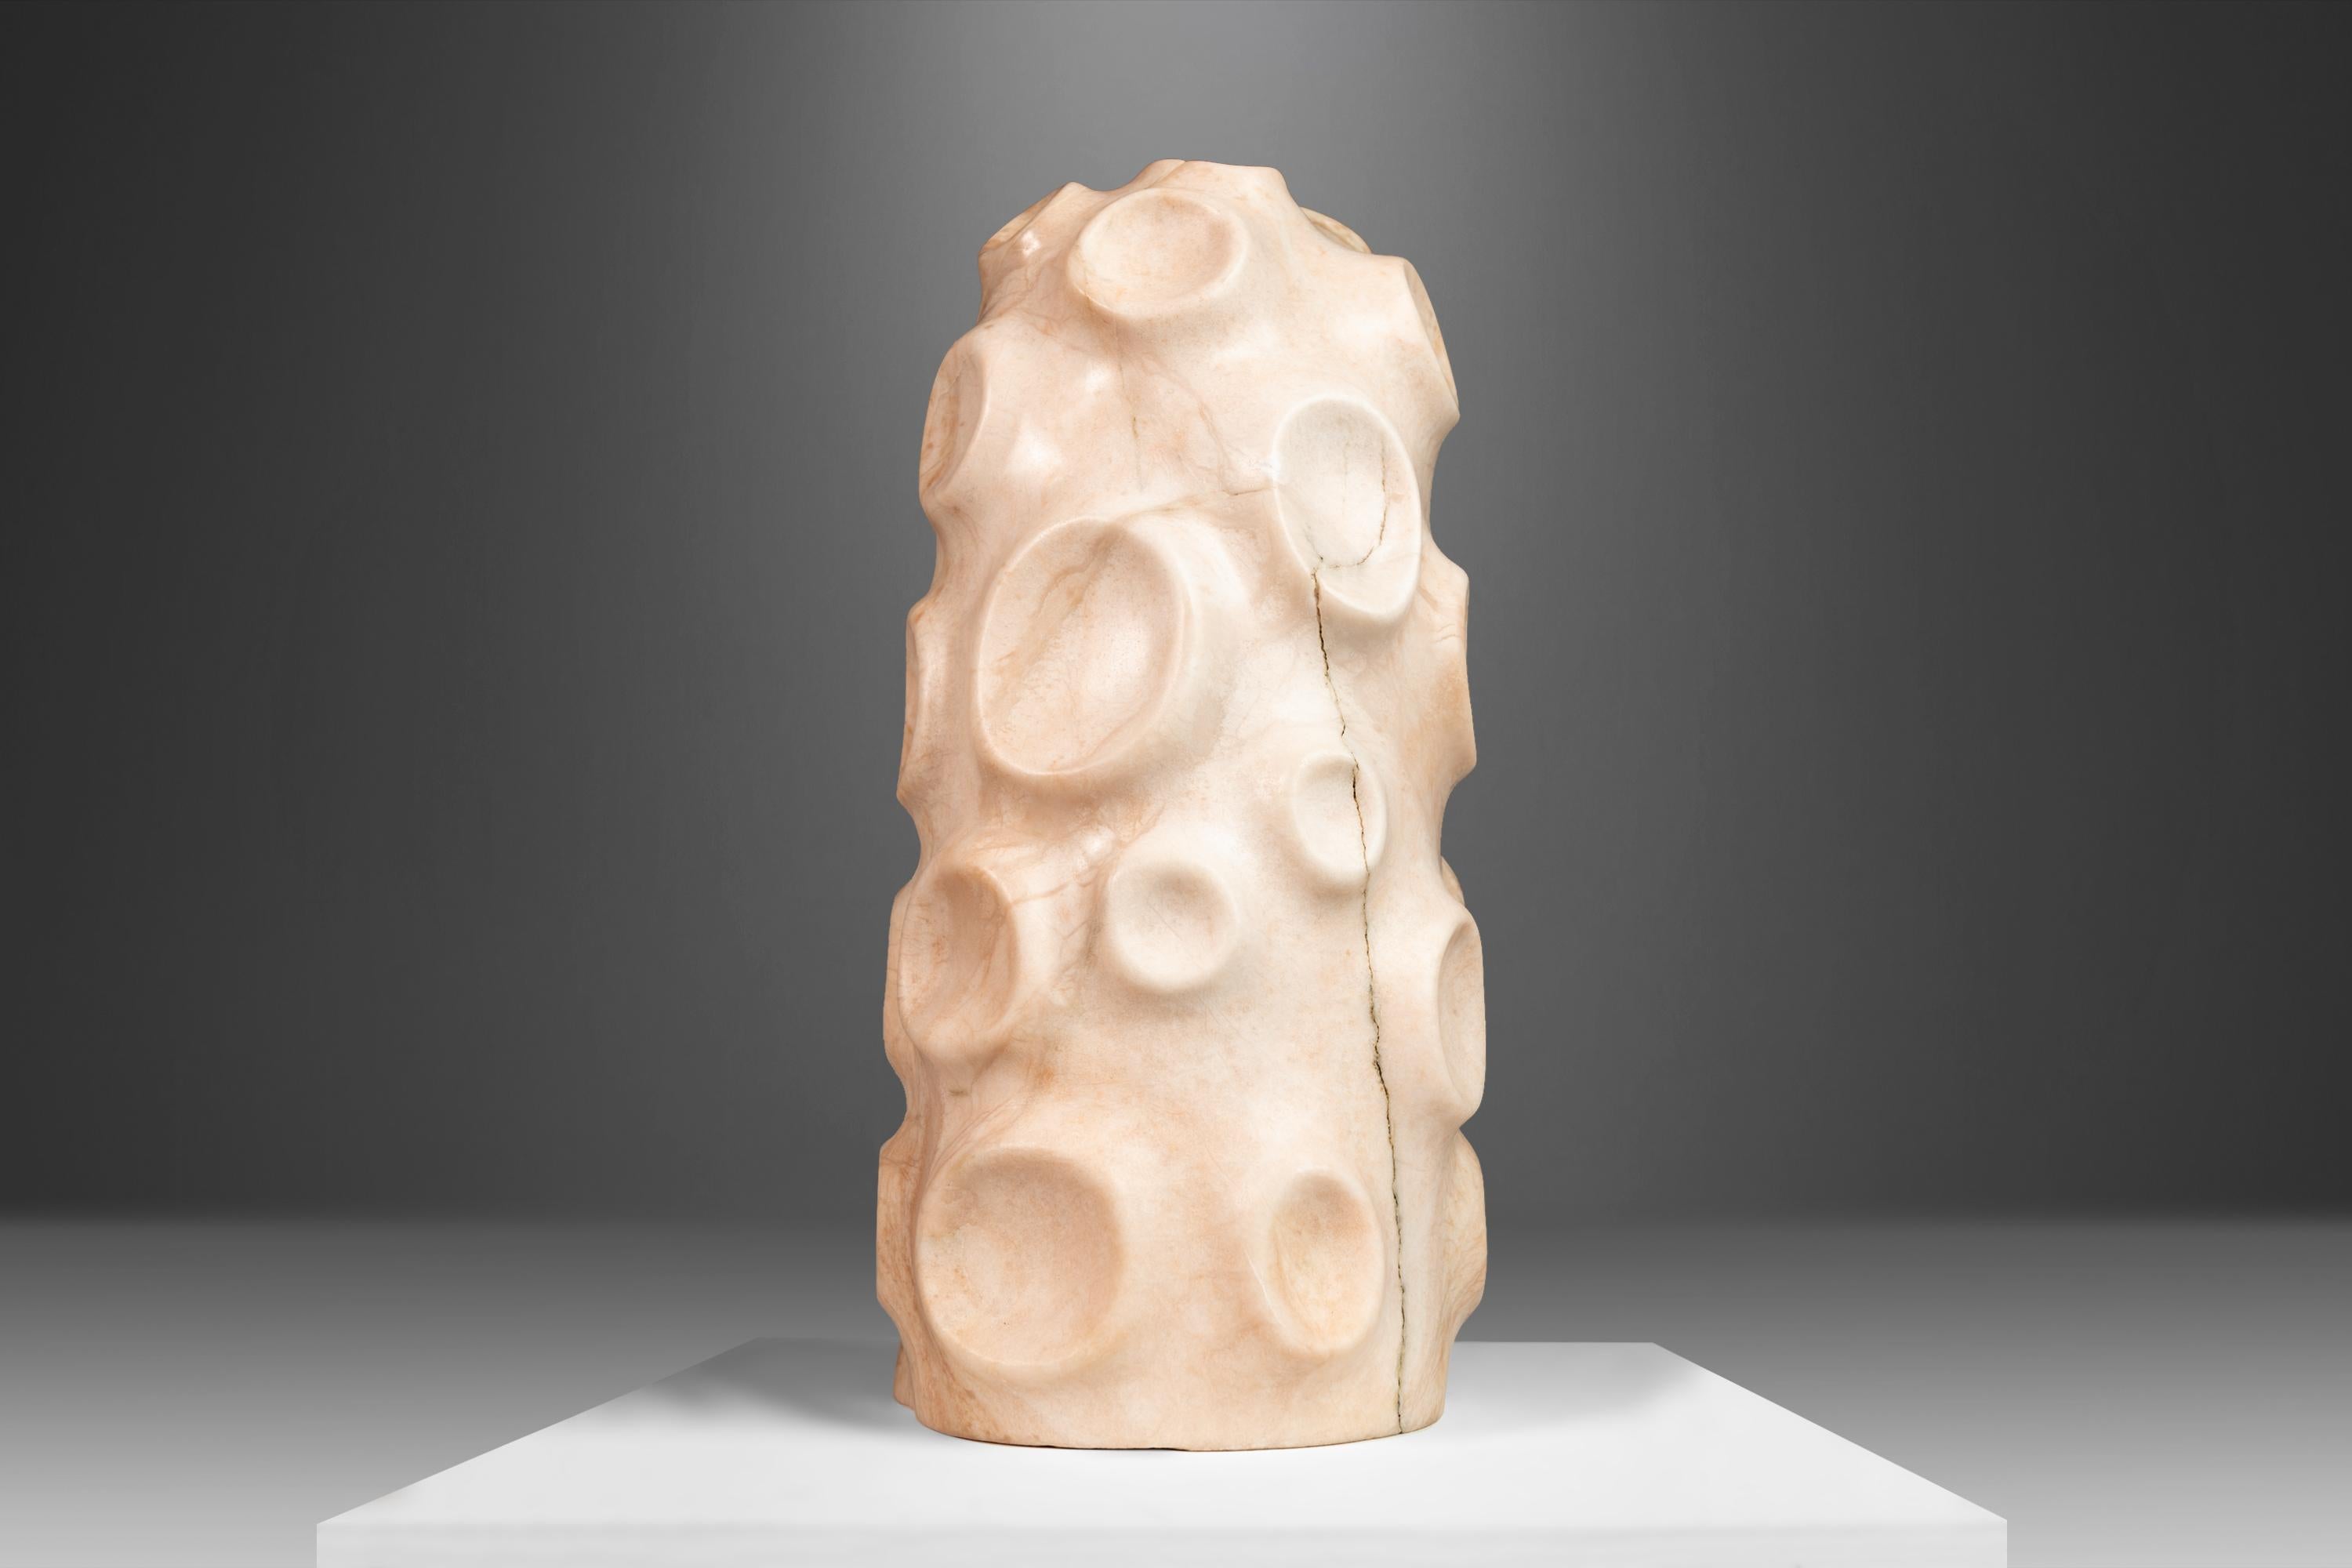 Hand-sculpted in pure, solid alabaster this fascinating sculpture is absolutely arresting from every angel. Sculpted by Mark Leblanc, an accomplished designer and craftsmen renowned for his Organic Modern pieces audaciously carved from all-natural